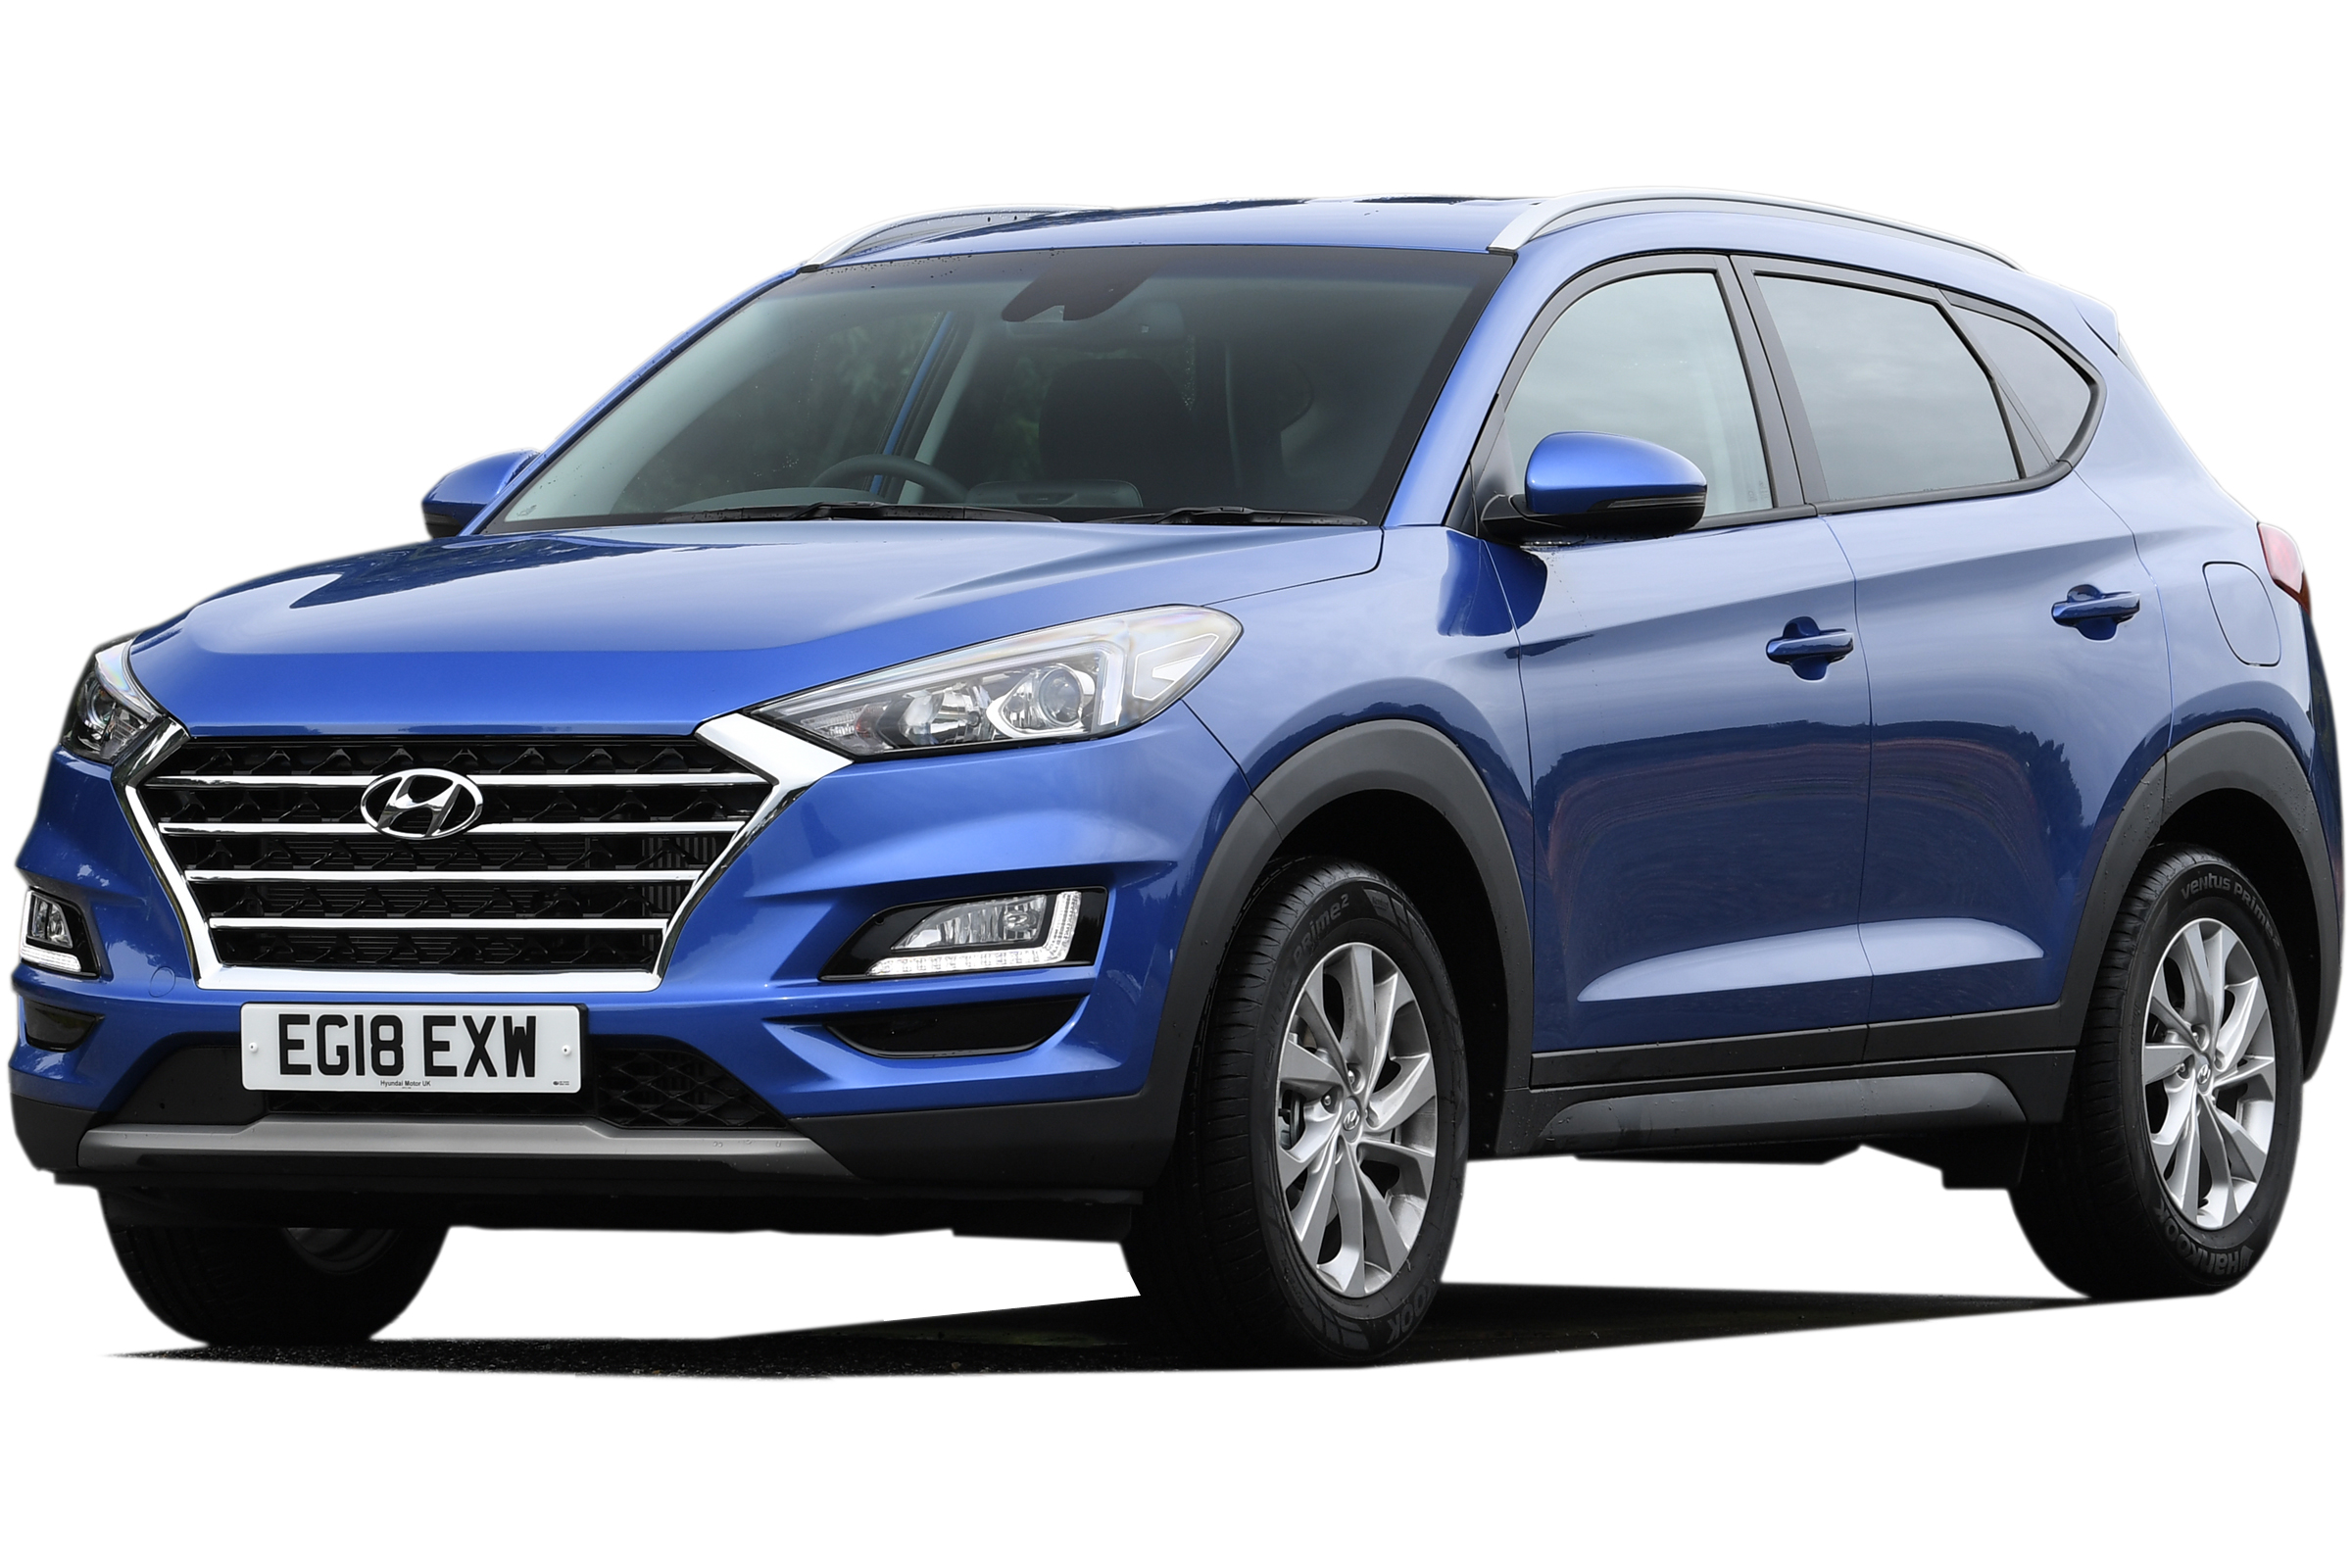 Hyundai Tucson SUV Reliability & safety 2020 review Carbuyer